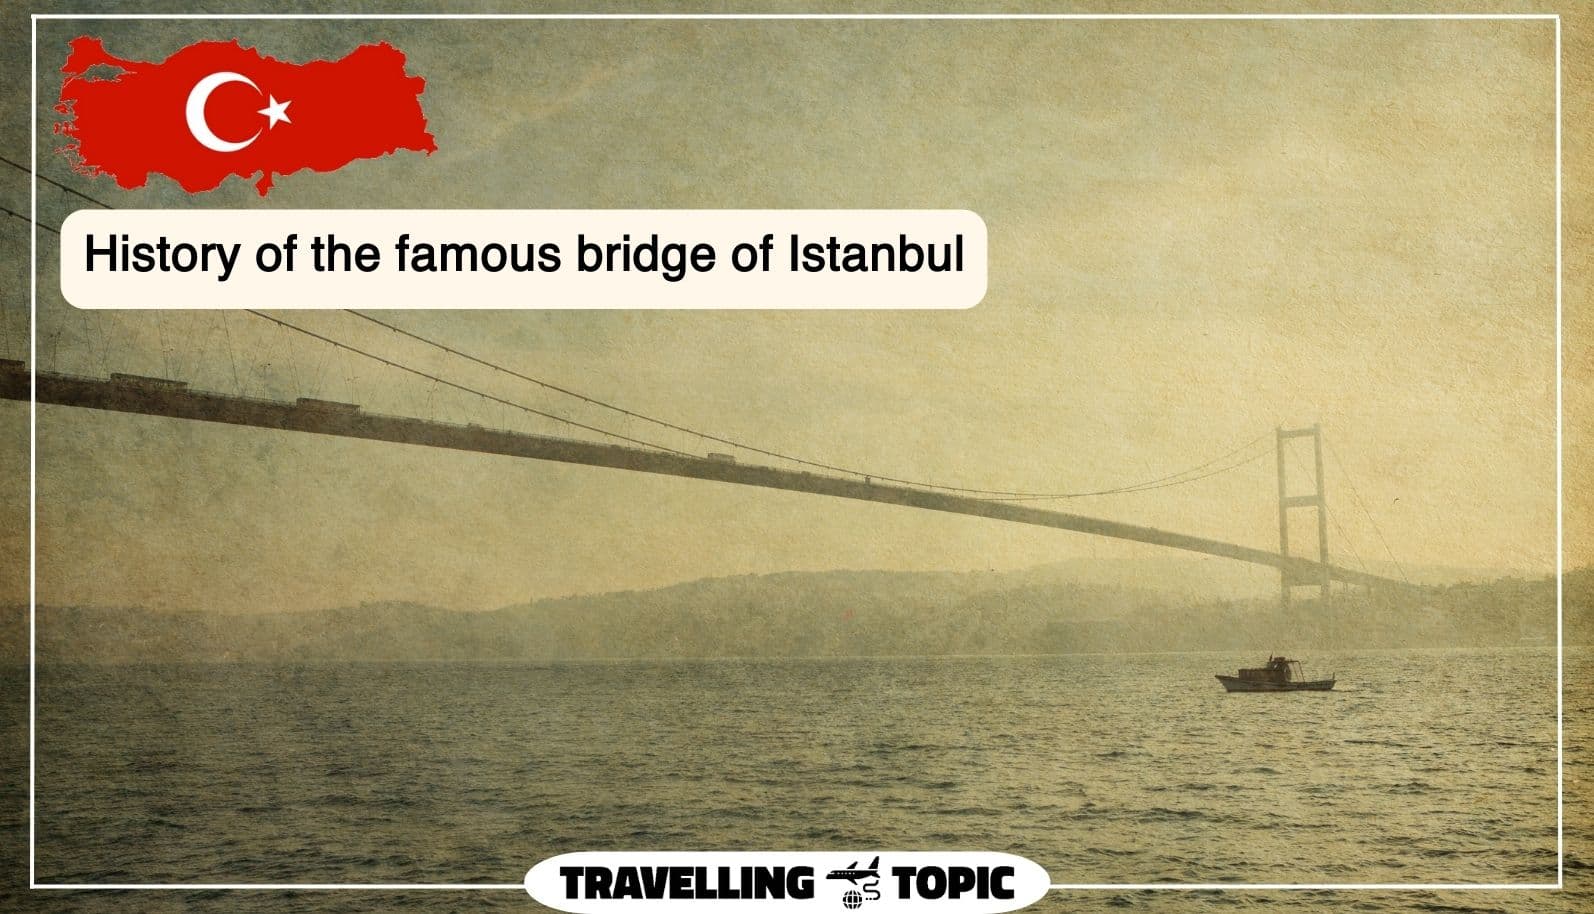 History of the famous bridge of Istanbul